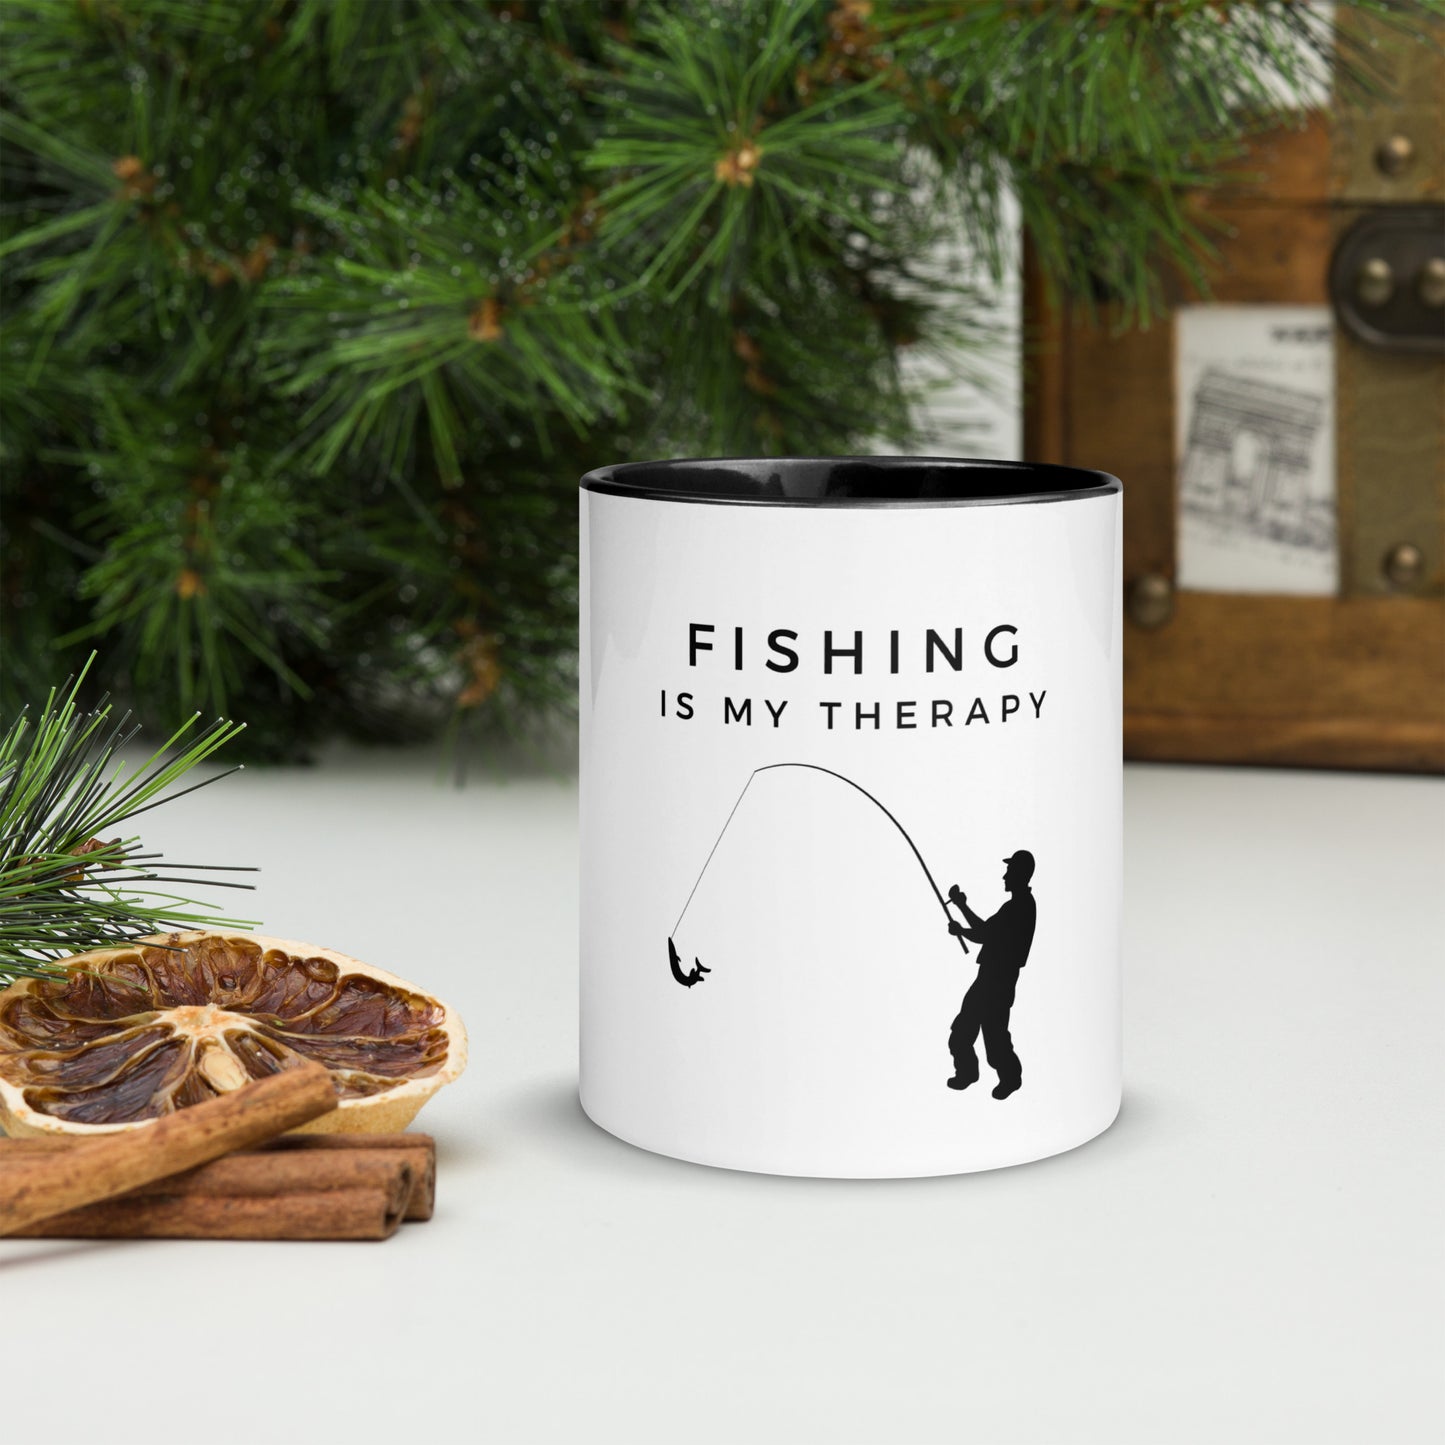 "Fishing Is My Therapy" Coffee Mug - Weave Got Gifts - Unique Gifts You Won’t Find Anywhere Else!